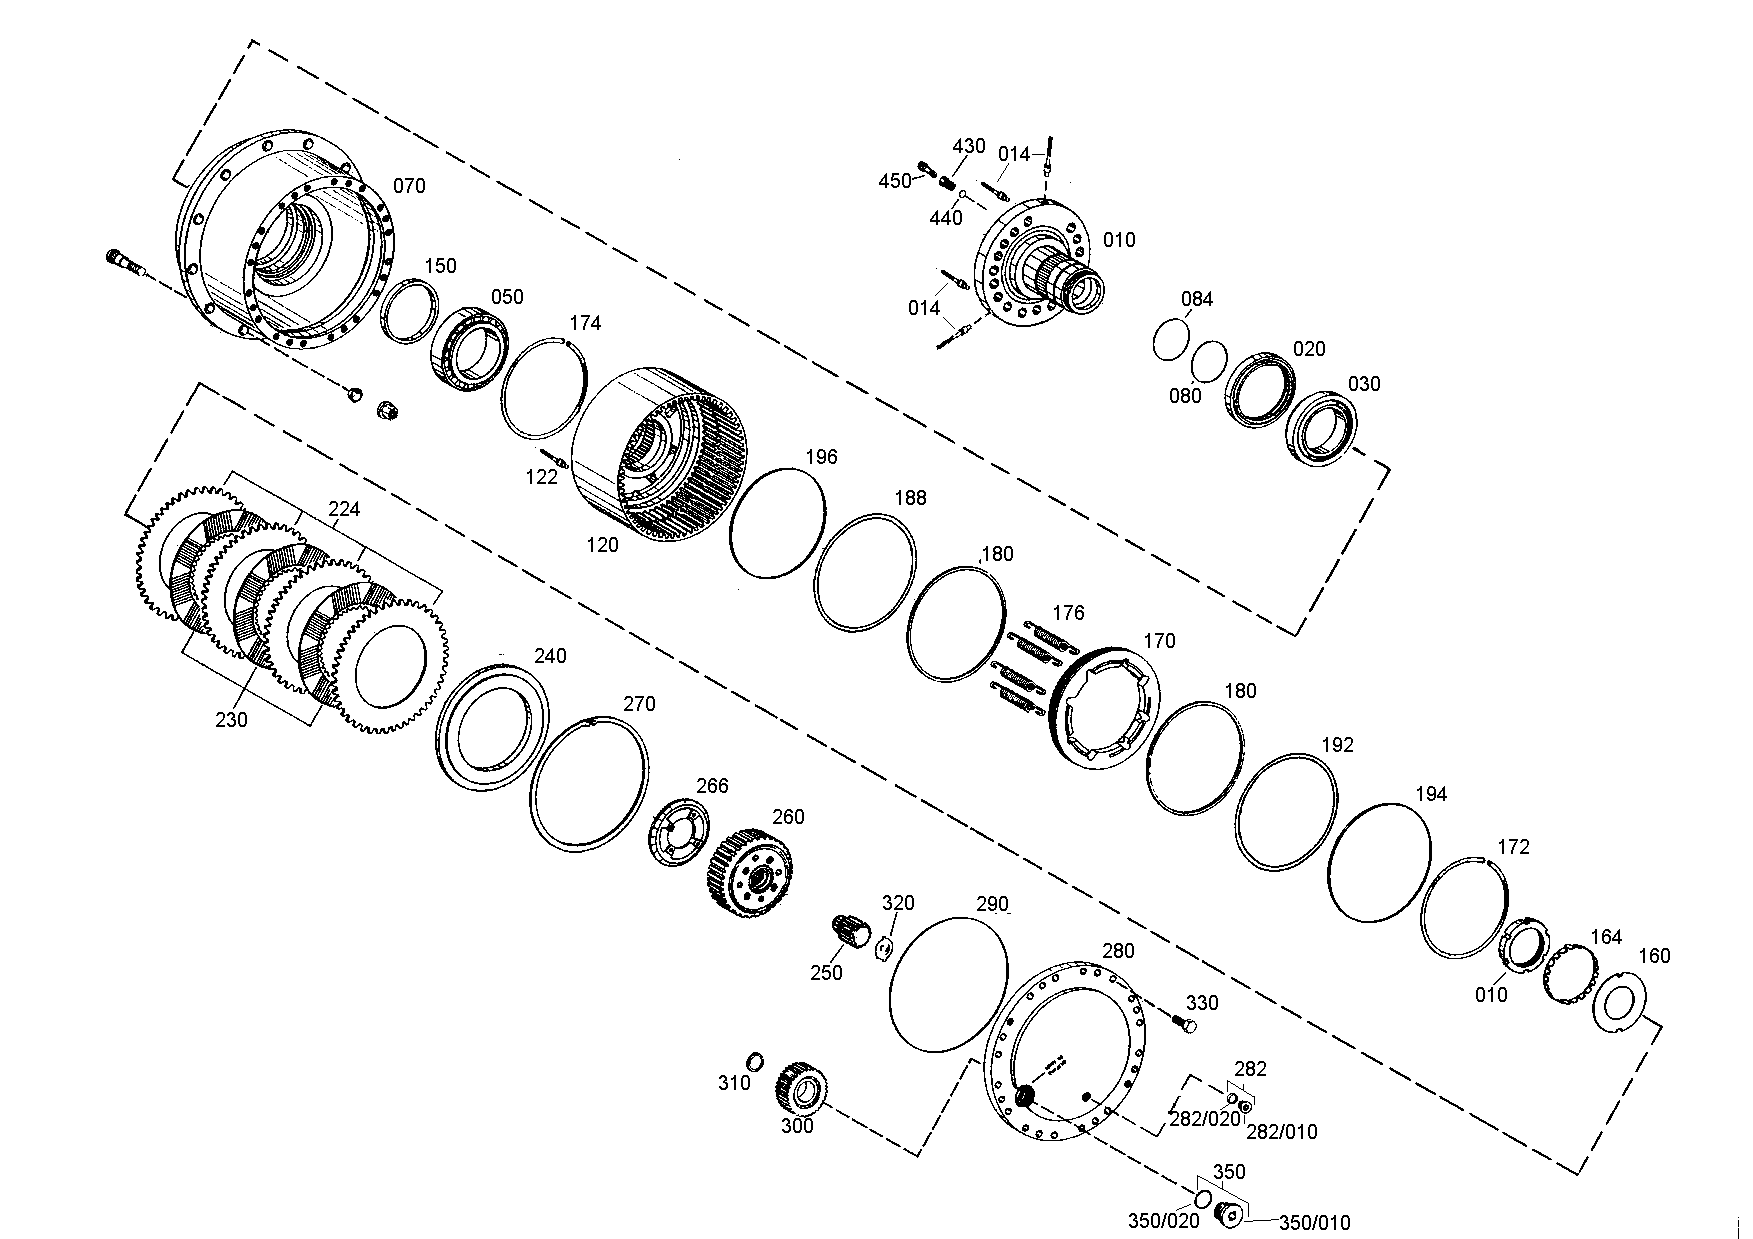 drawing for VOITH-GETRIEBE KG 01.0585.11 - O-RING (figure 3)